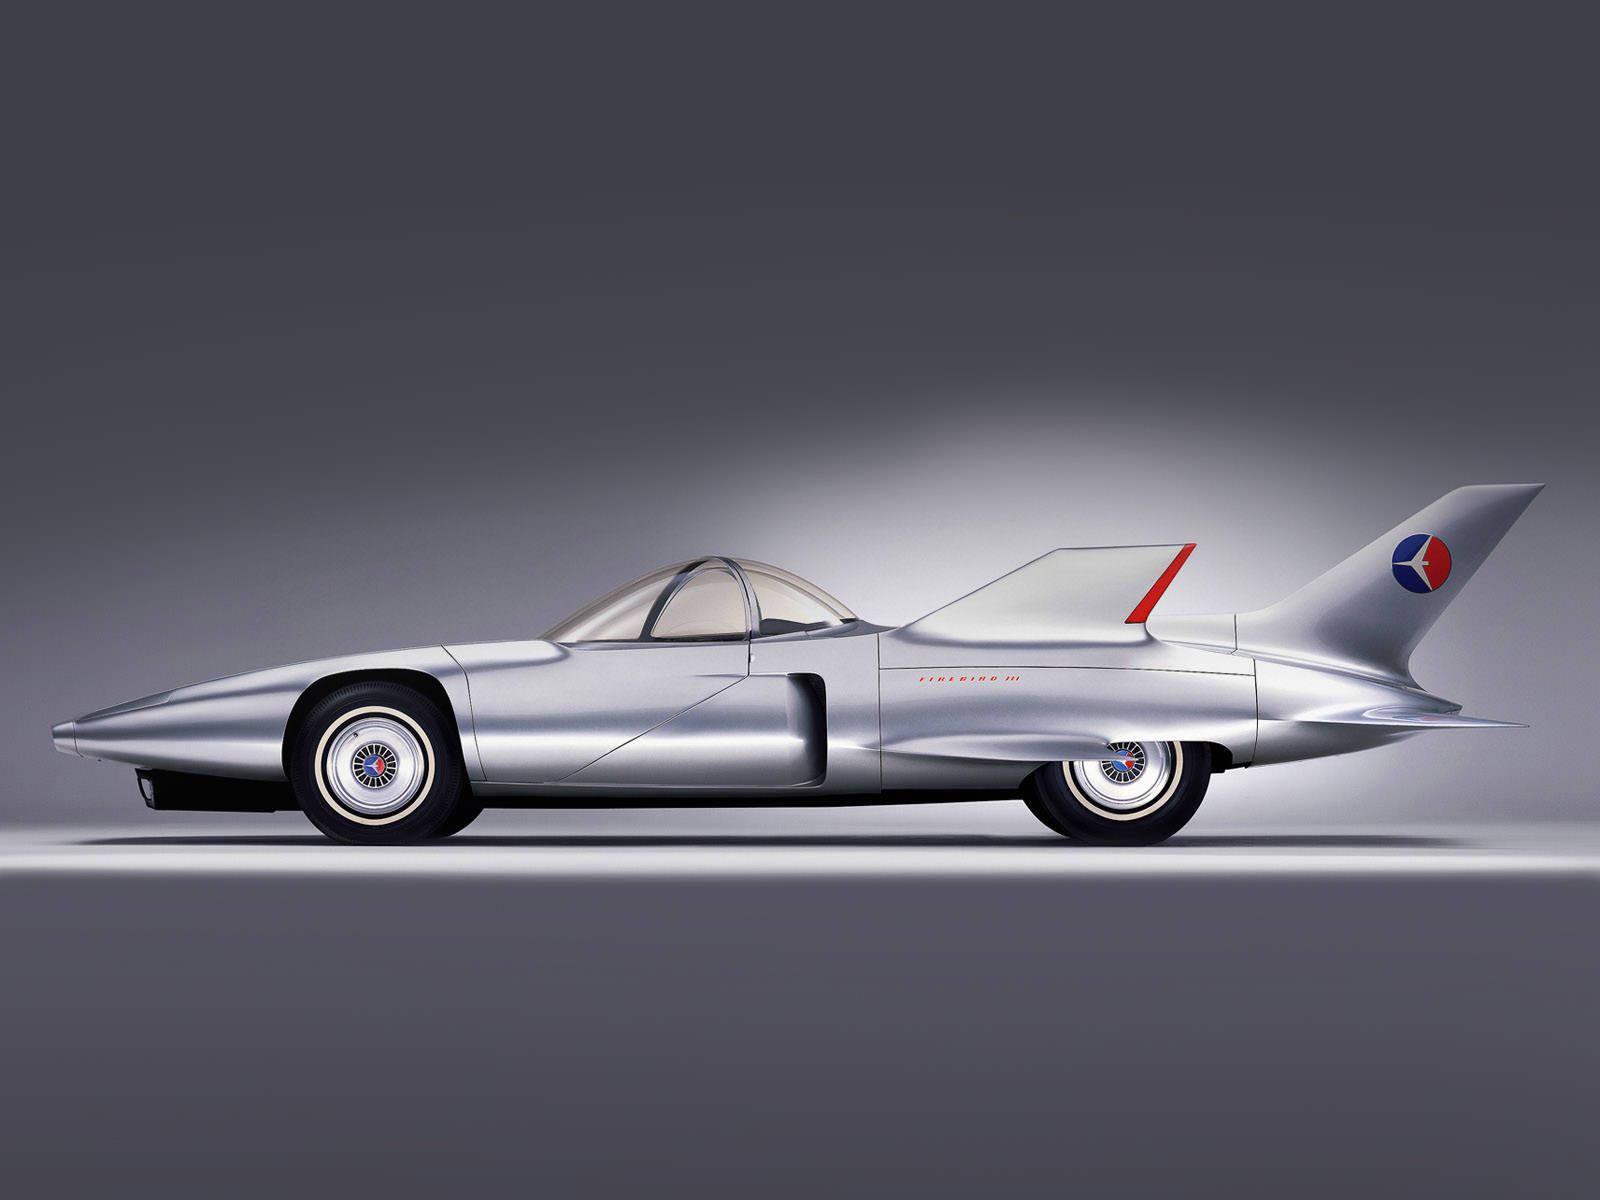 30 incredibly bonkers and beautiful cars from the 1950s to now image 20